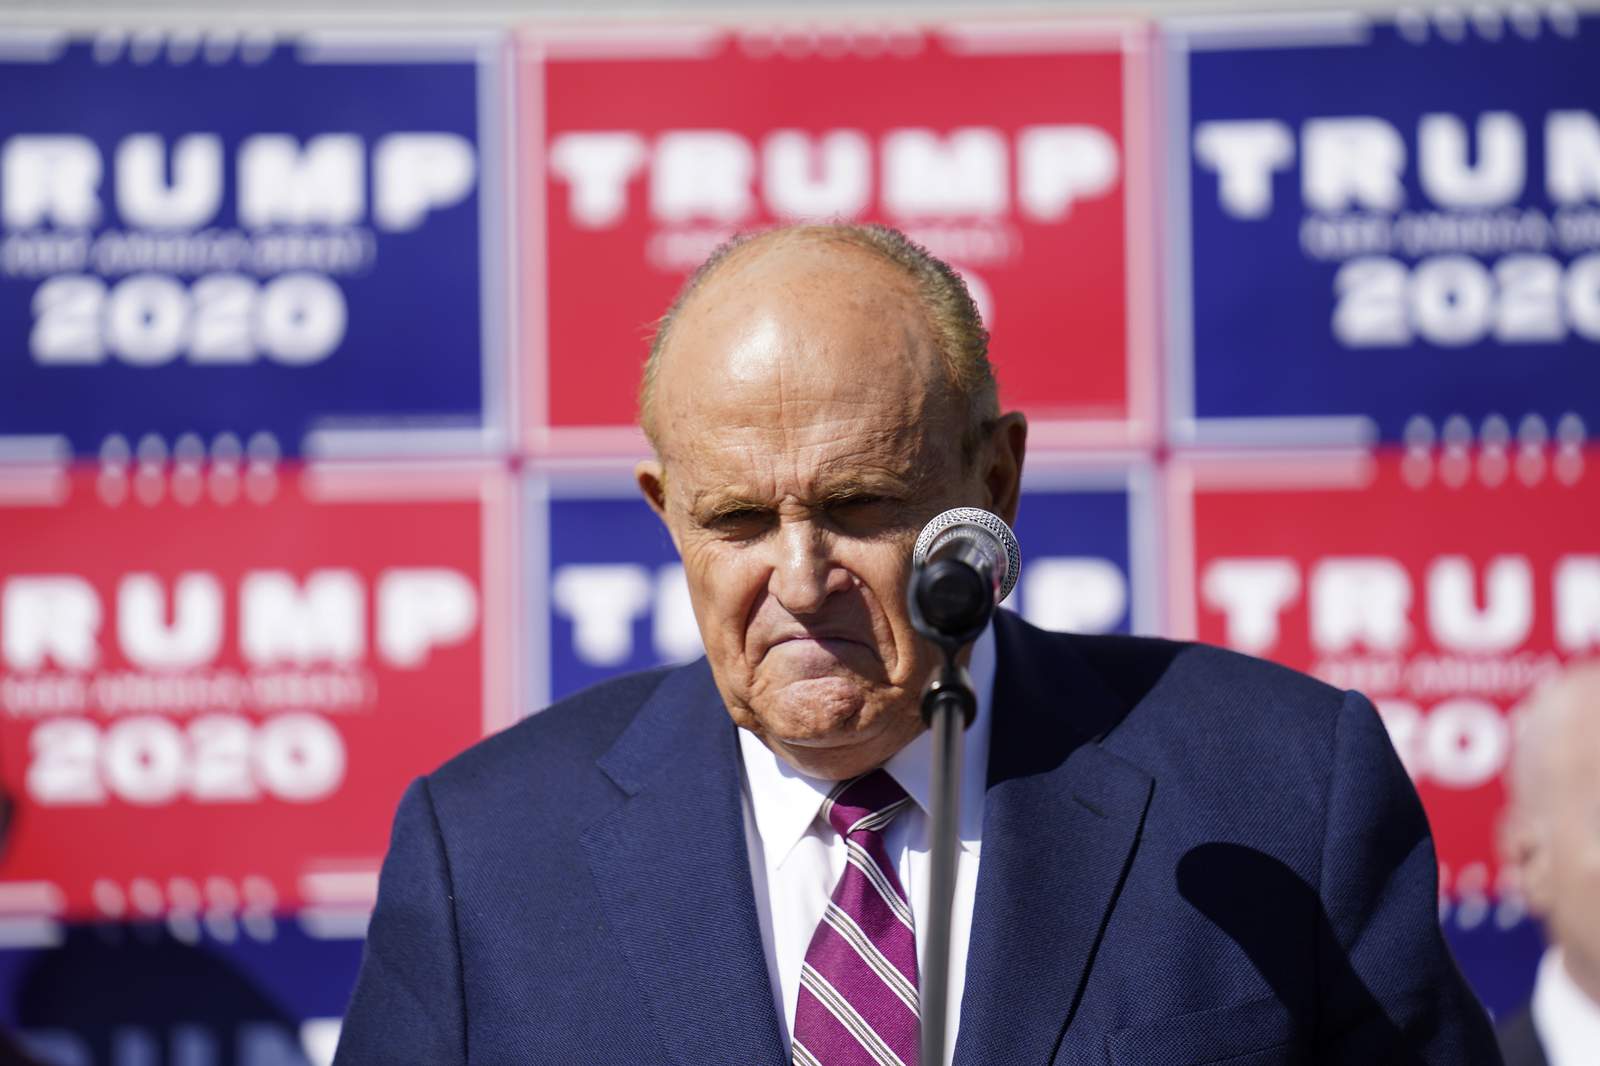 A rusty Giuliani returns to the courtroom on Trump's behalf